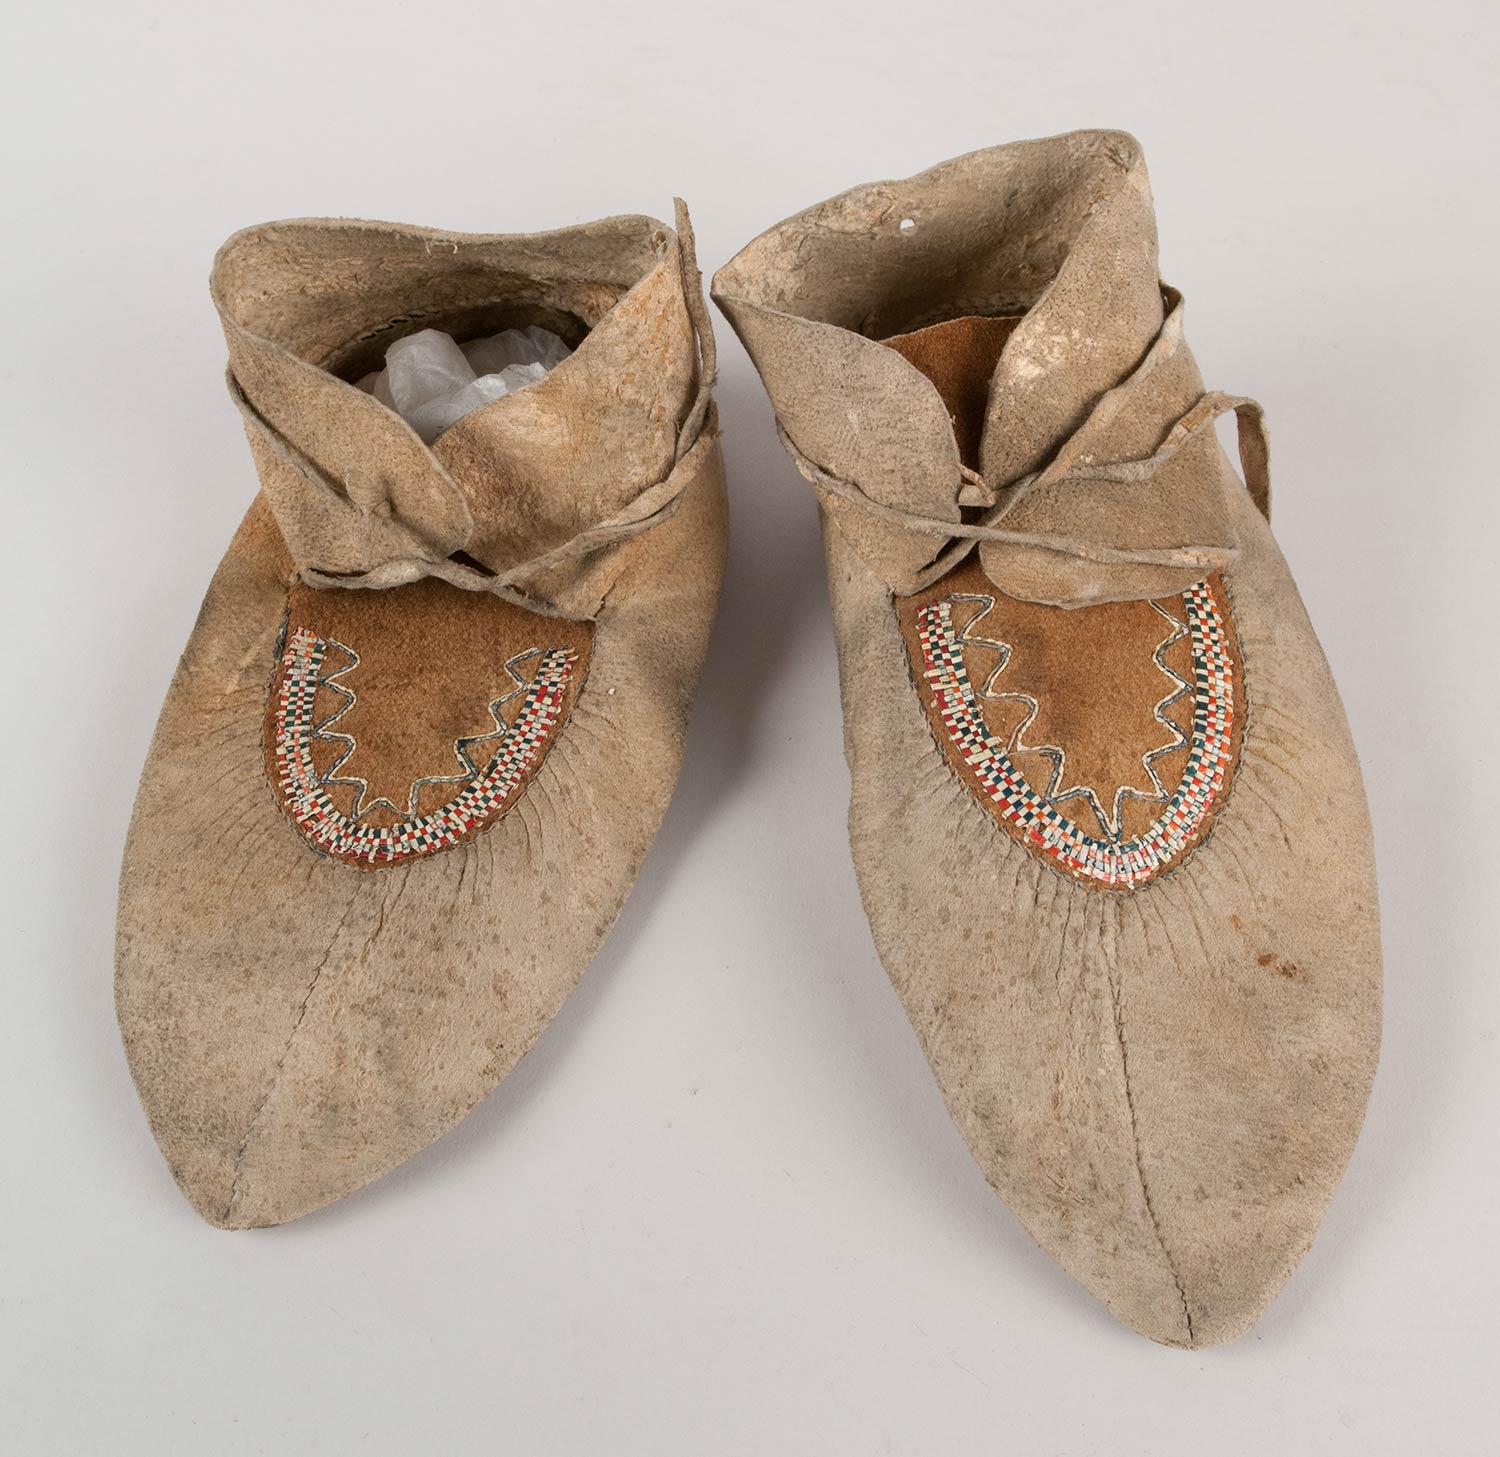 Pair of quillwork moccasins made from two pieces of hide, either caribou or moose. Quillwork design is a checkered weave of red, blue, and yellow quills.